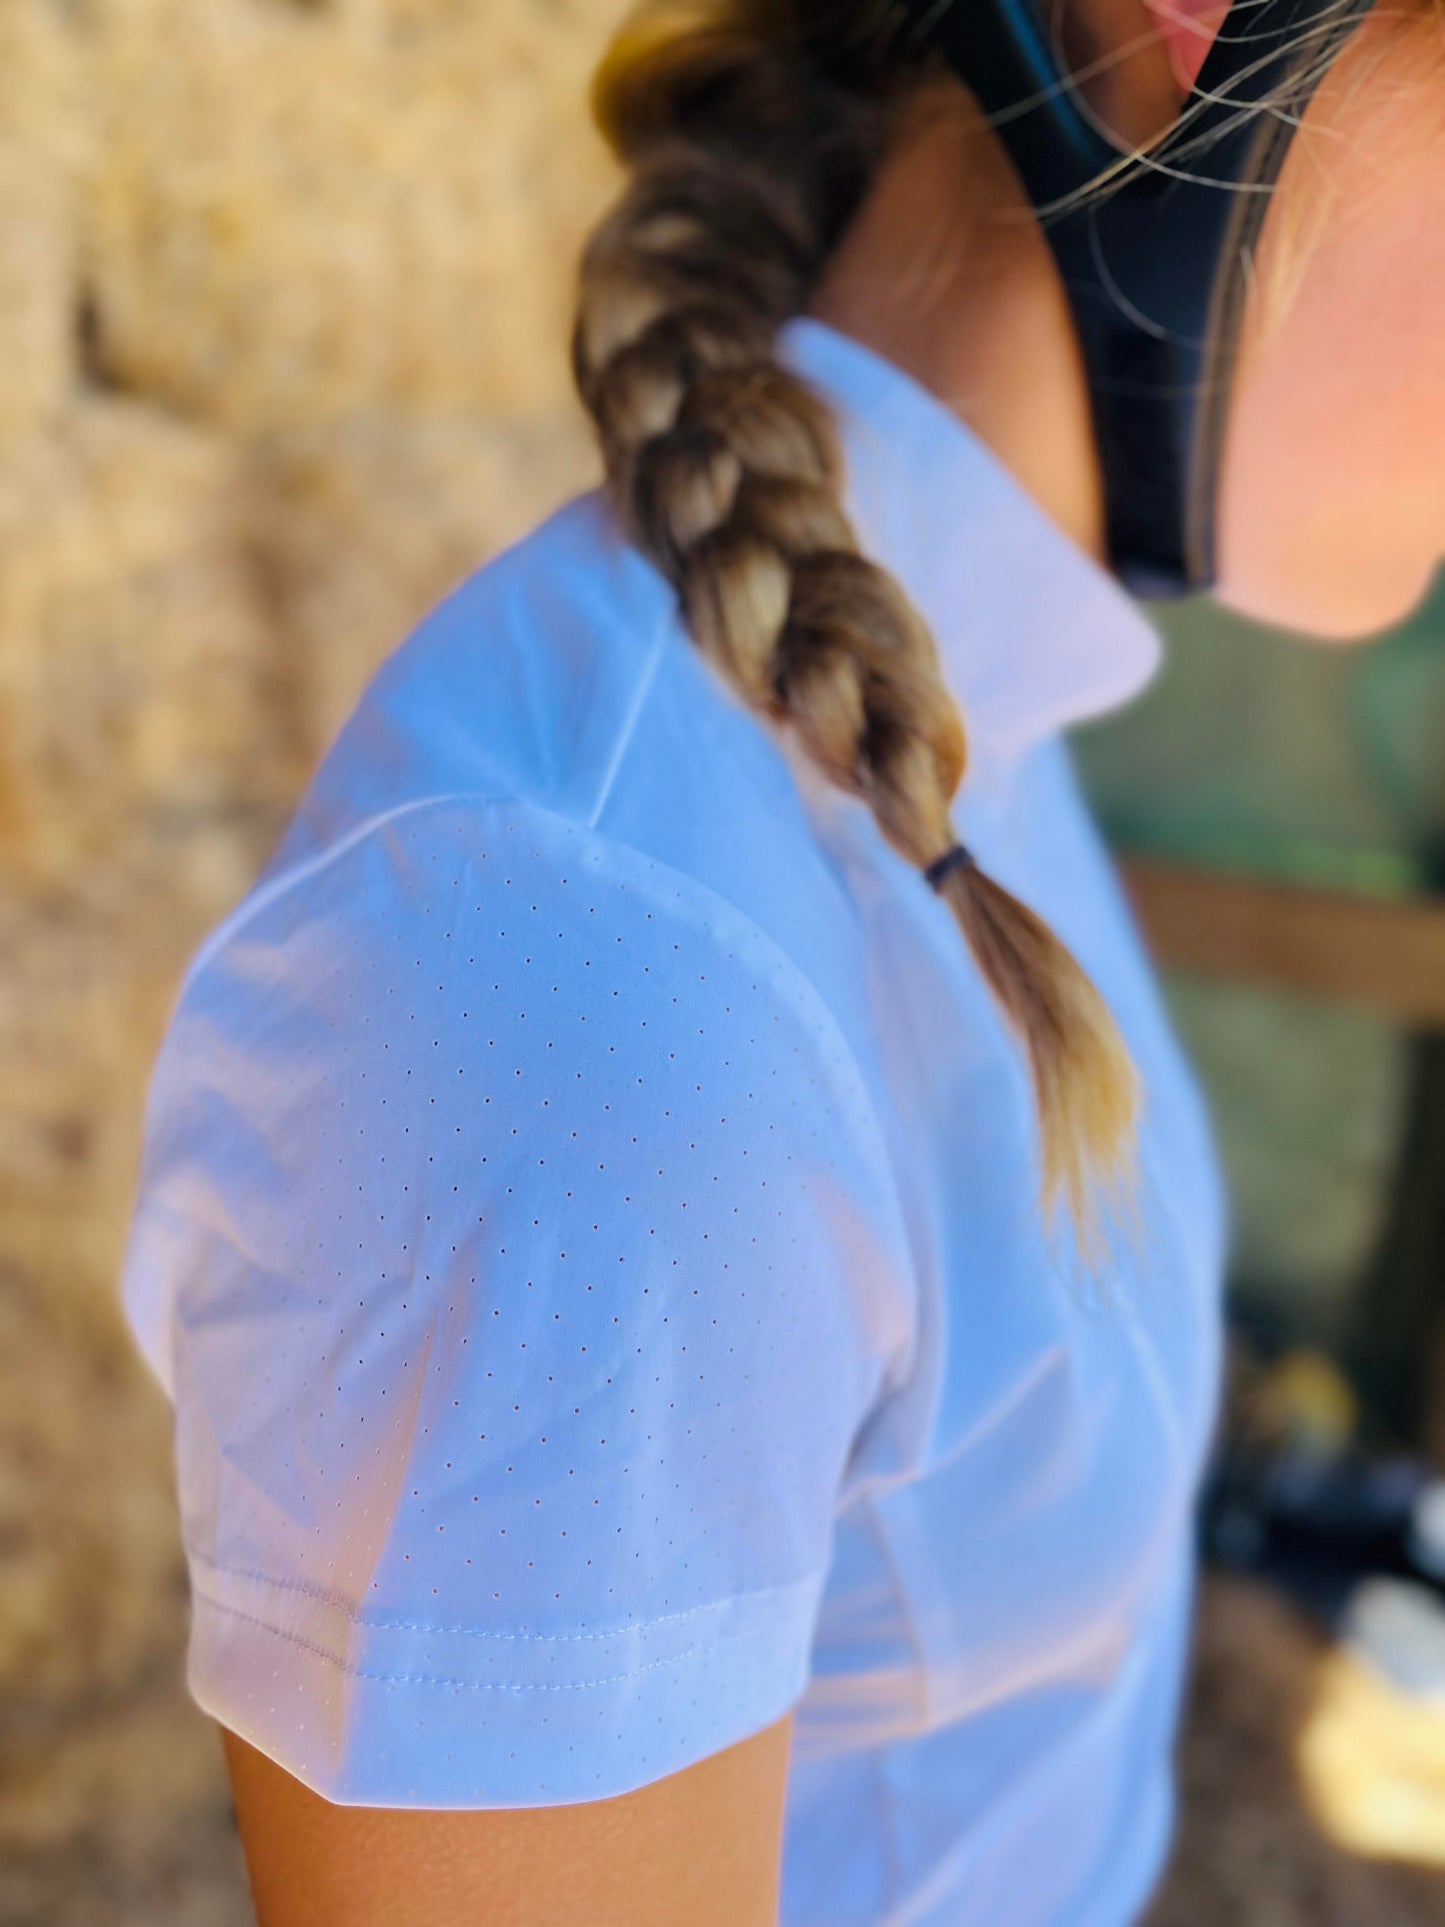 Cloud Nines perforations allow heat and moisture to escape more efficiently, reducing the likelihood of sweating and providing enhanced breathability. This is especially beneficial in warm or humid conditions.